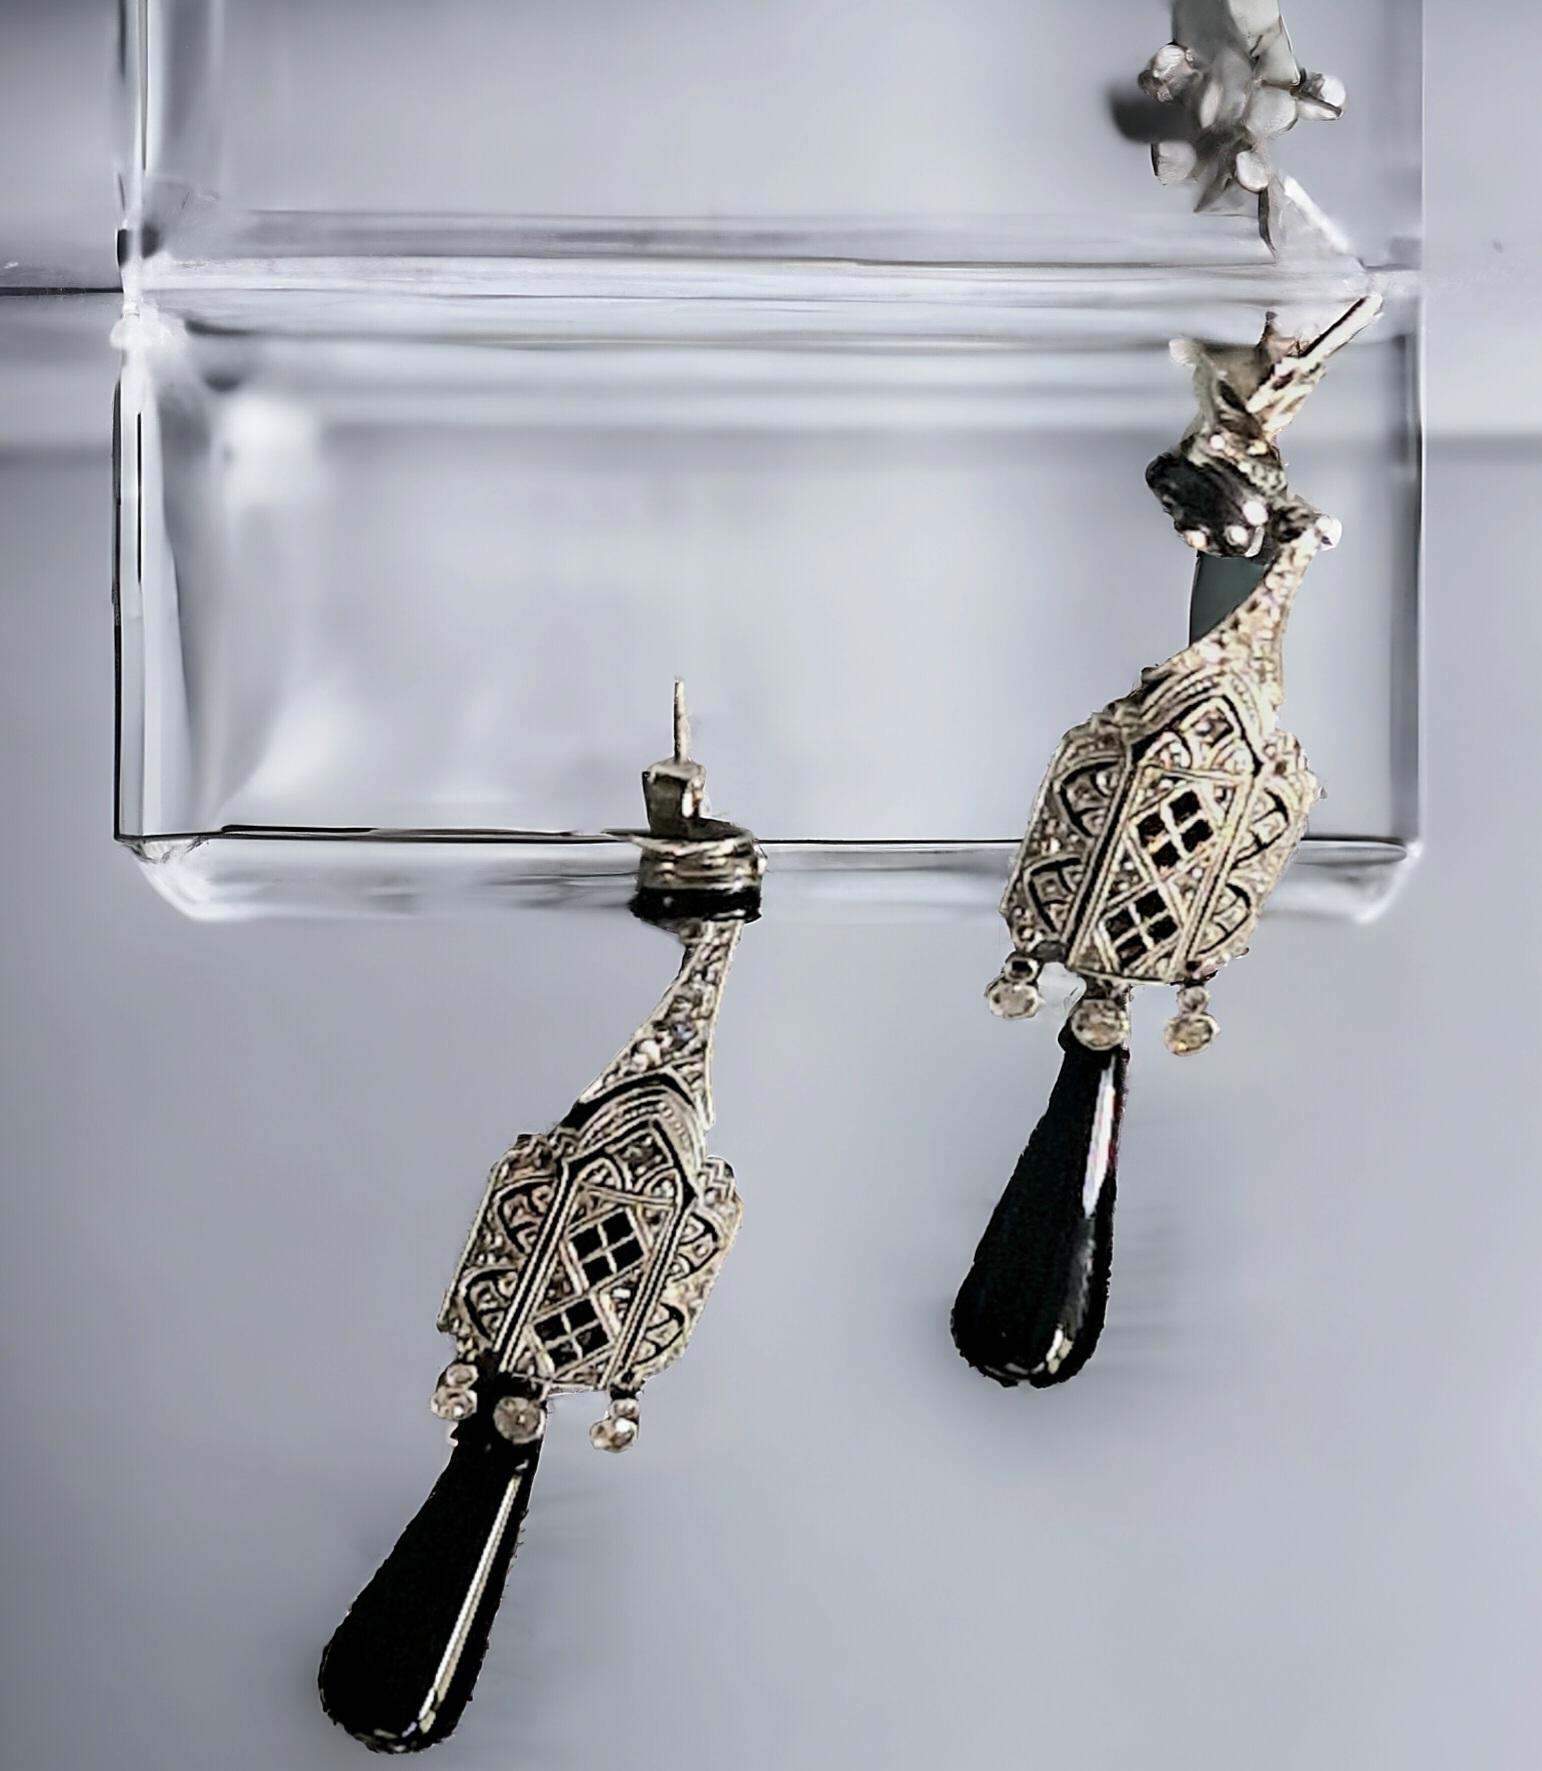 A Pair of Onyx and Diamond Earrings. Art-Deco Style. Mounted in Platinum. For Sale 1